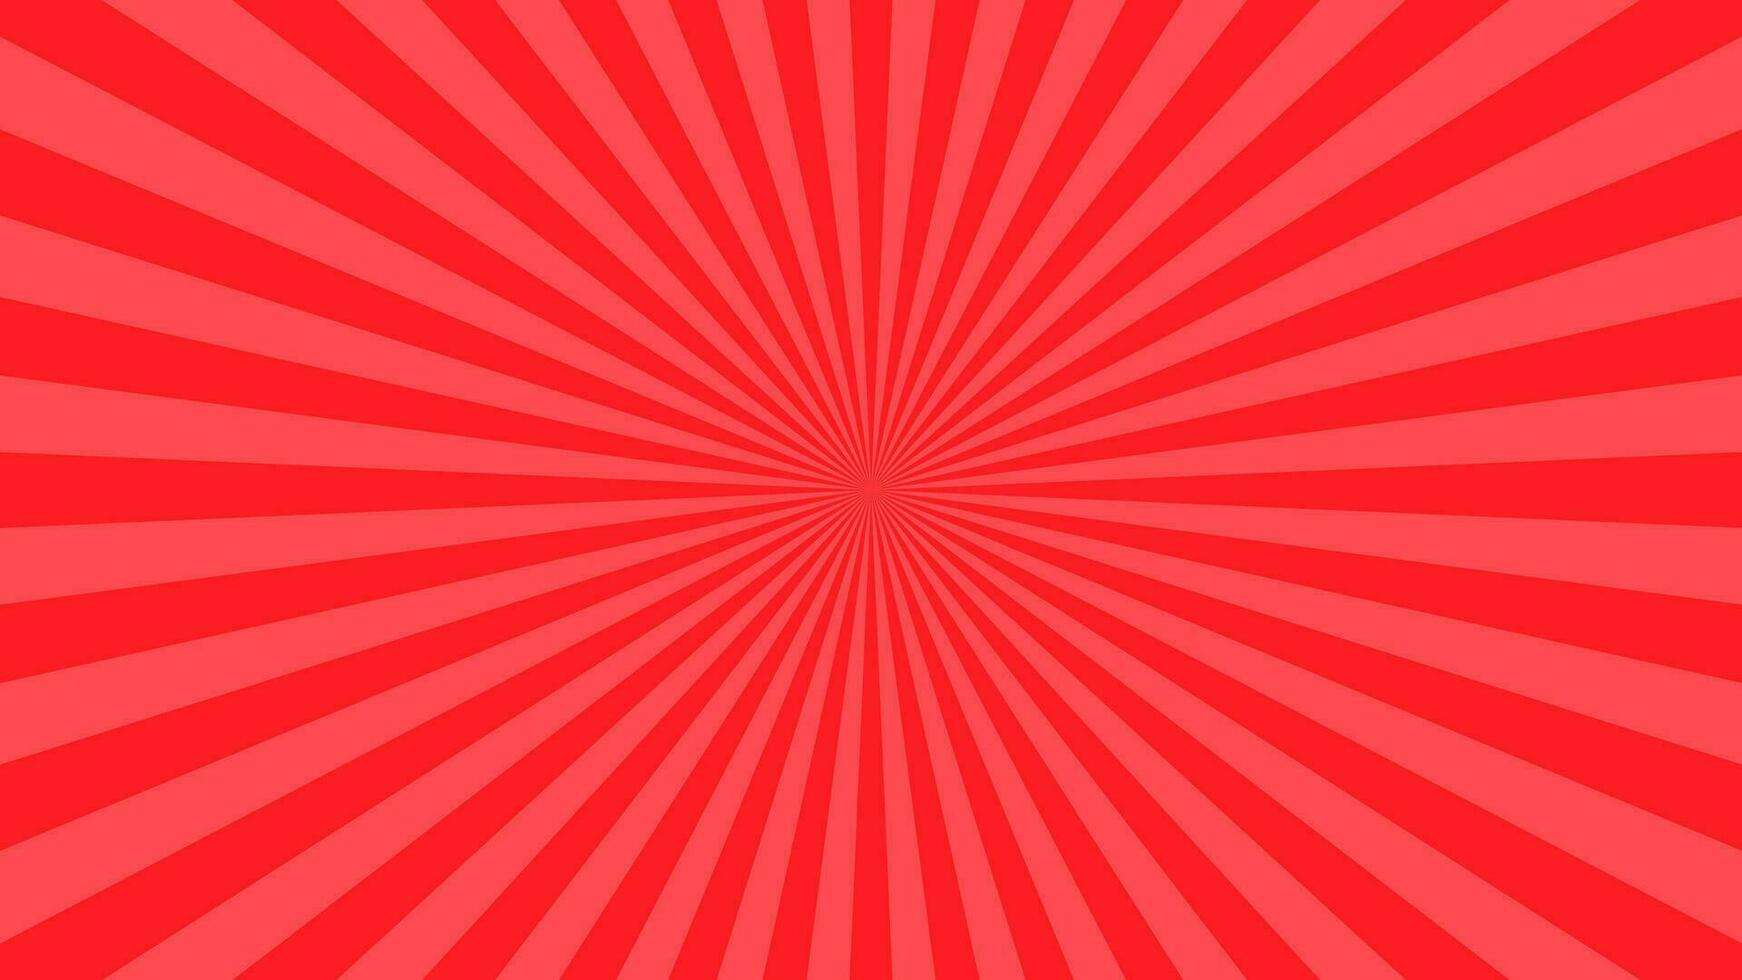 Simple Light Red Radial Stripe Lines Vector Background